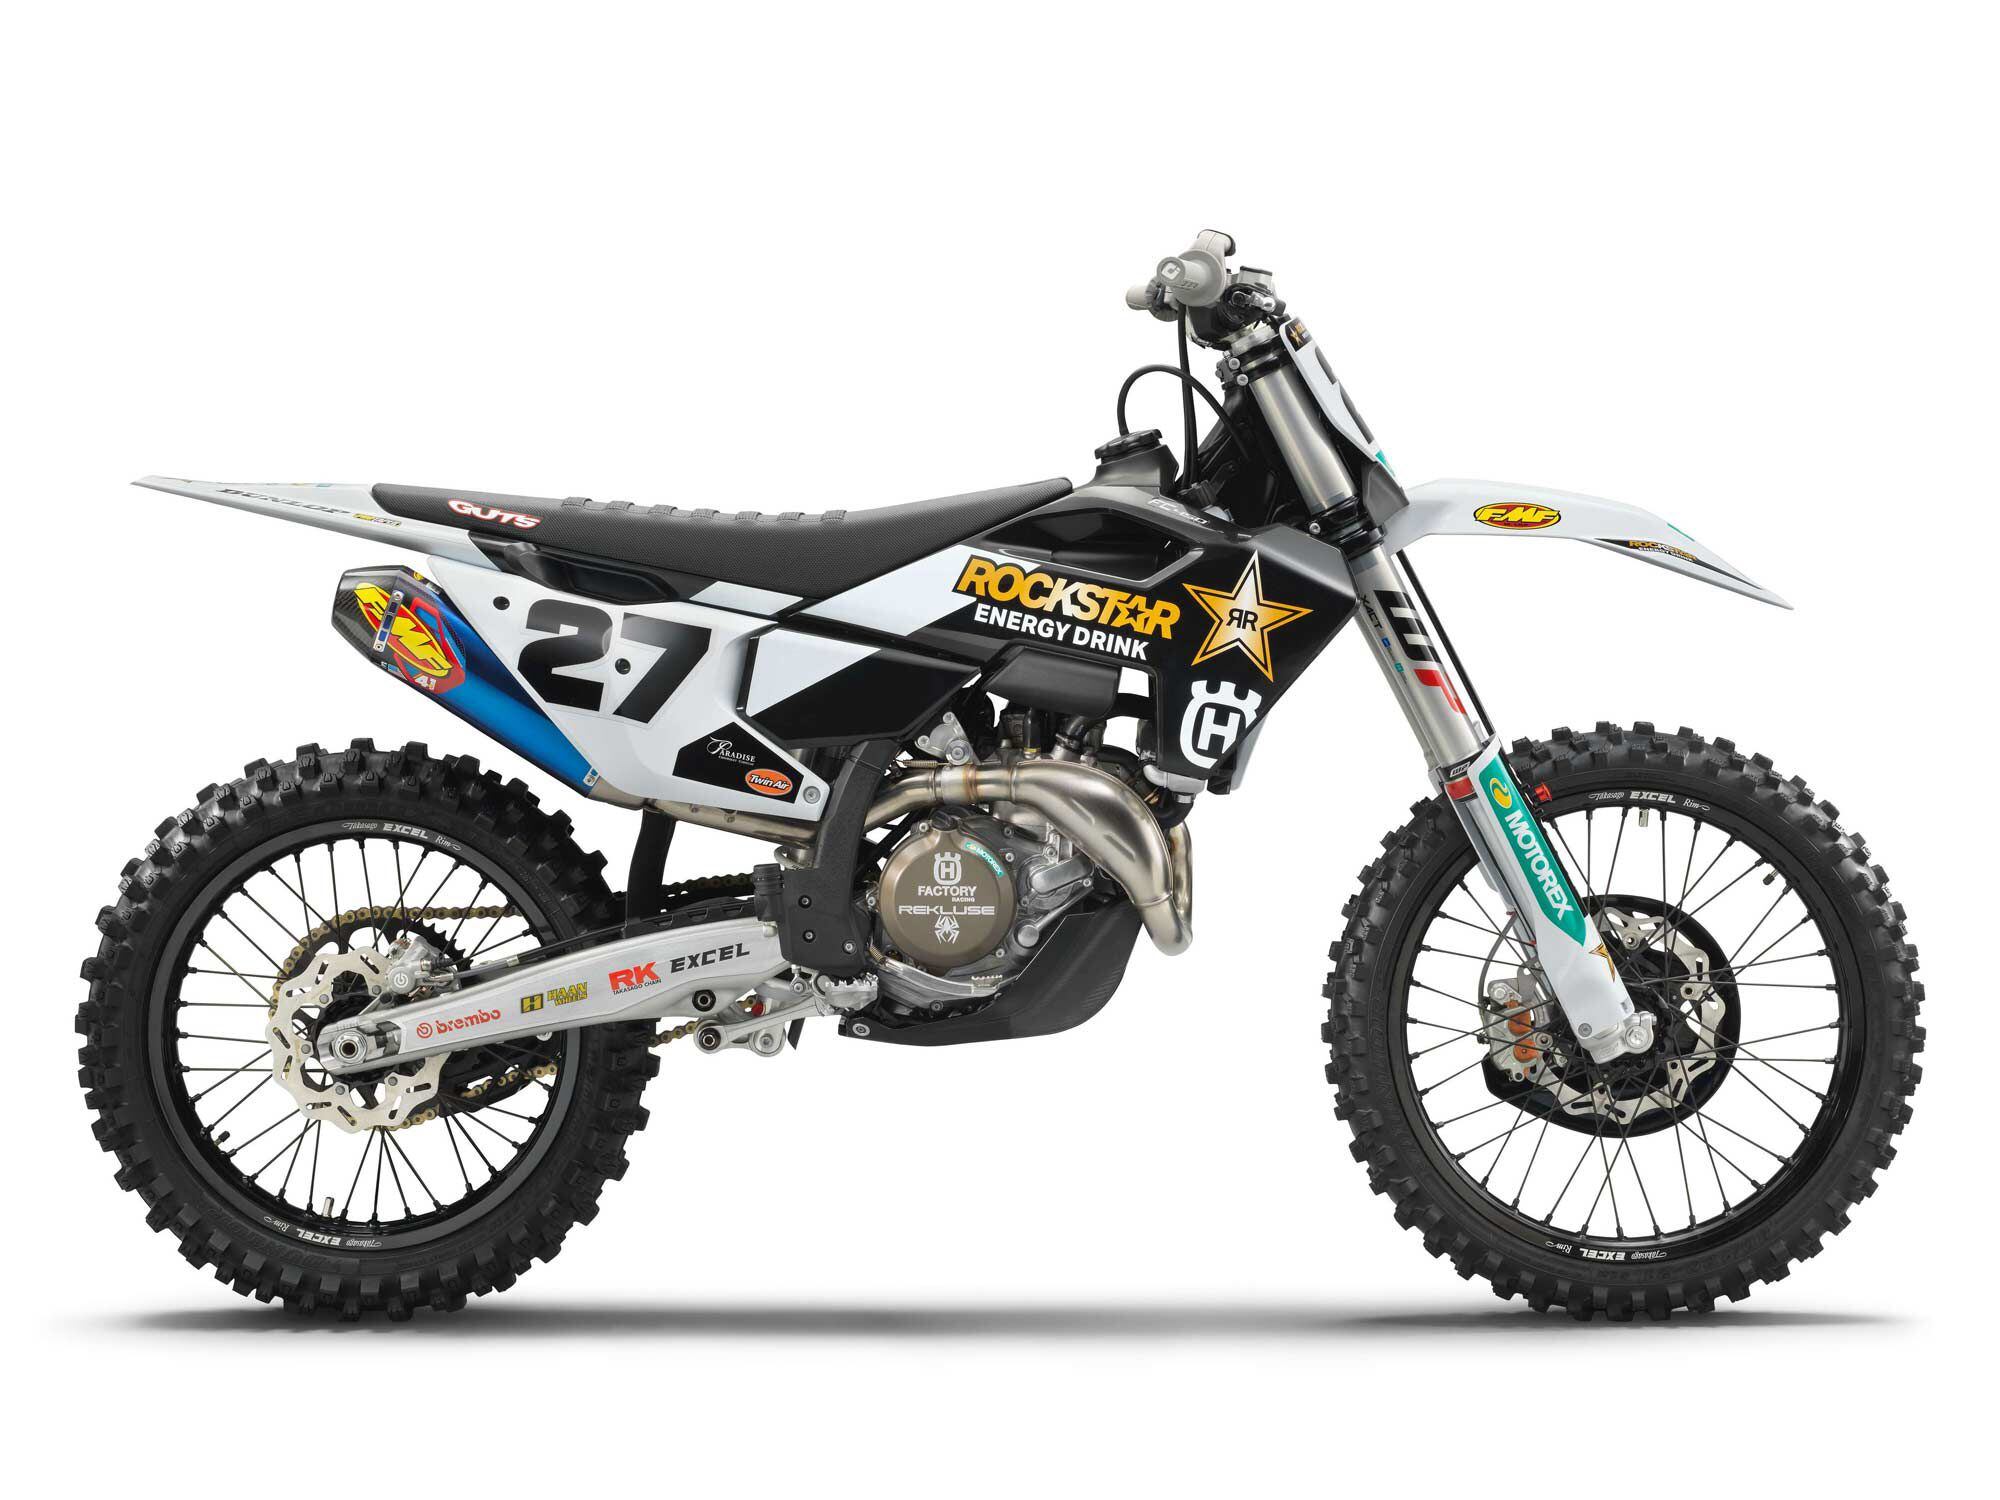 The latest FC 450 Rockstar Edition is coming to dealers early 2023.